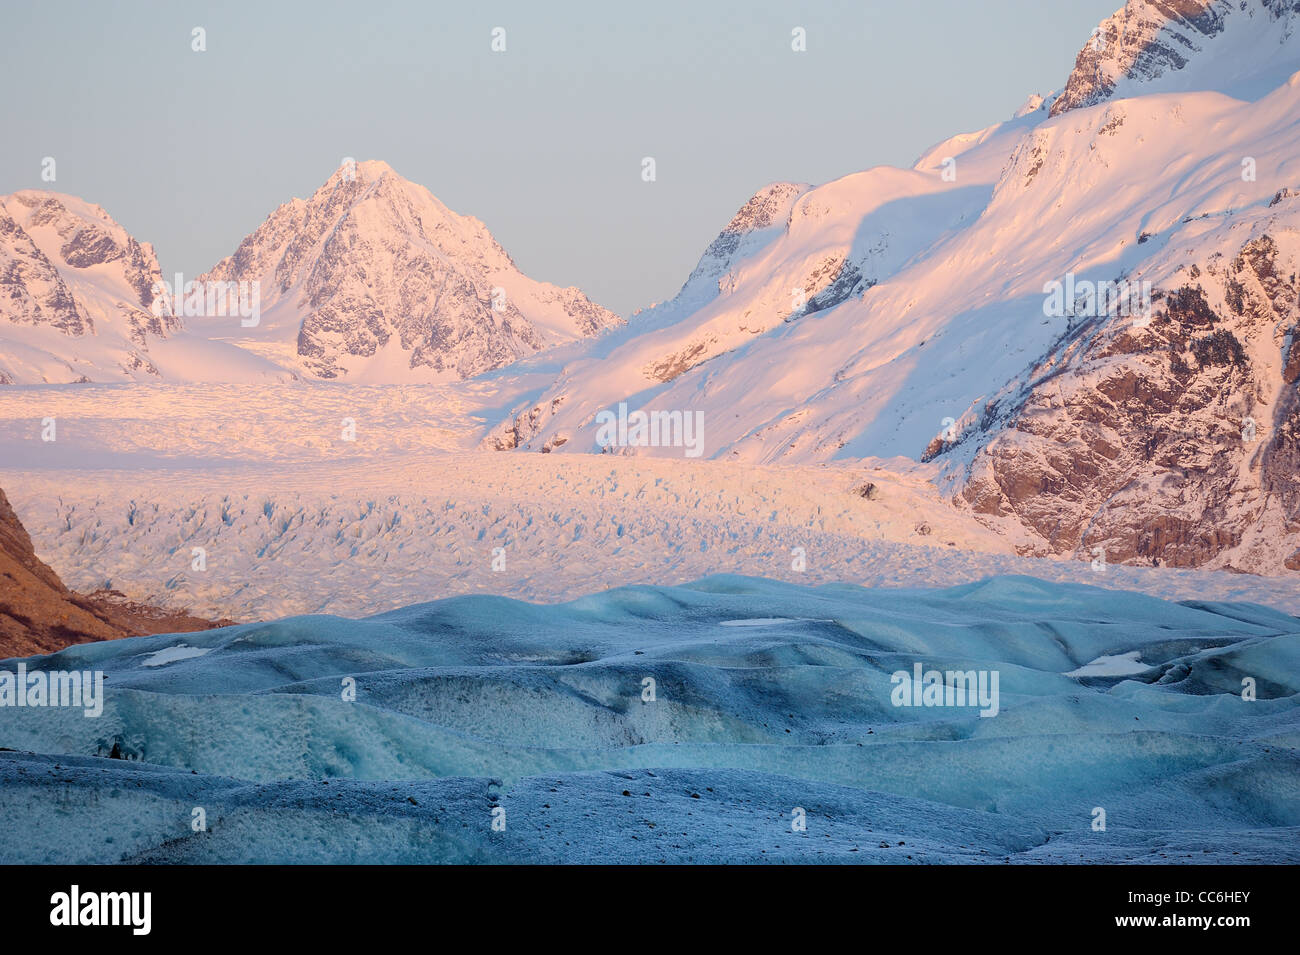 A glacier on mountains illuminated with soft pink evening light. Stock Photo